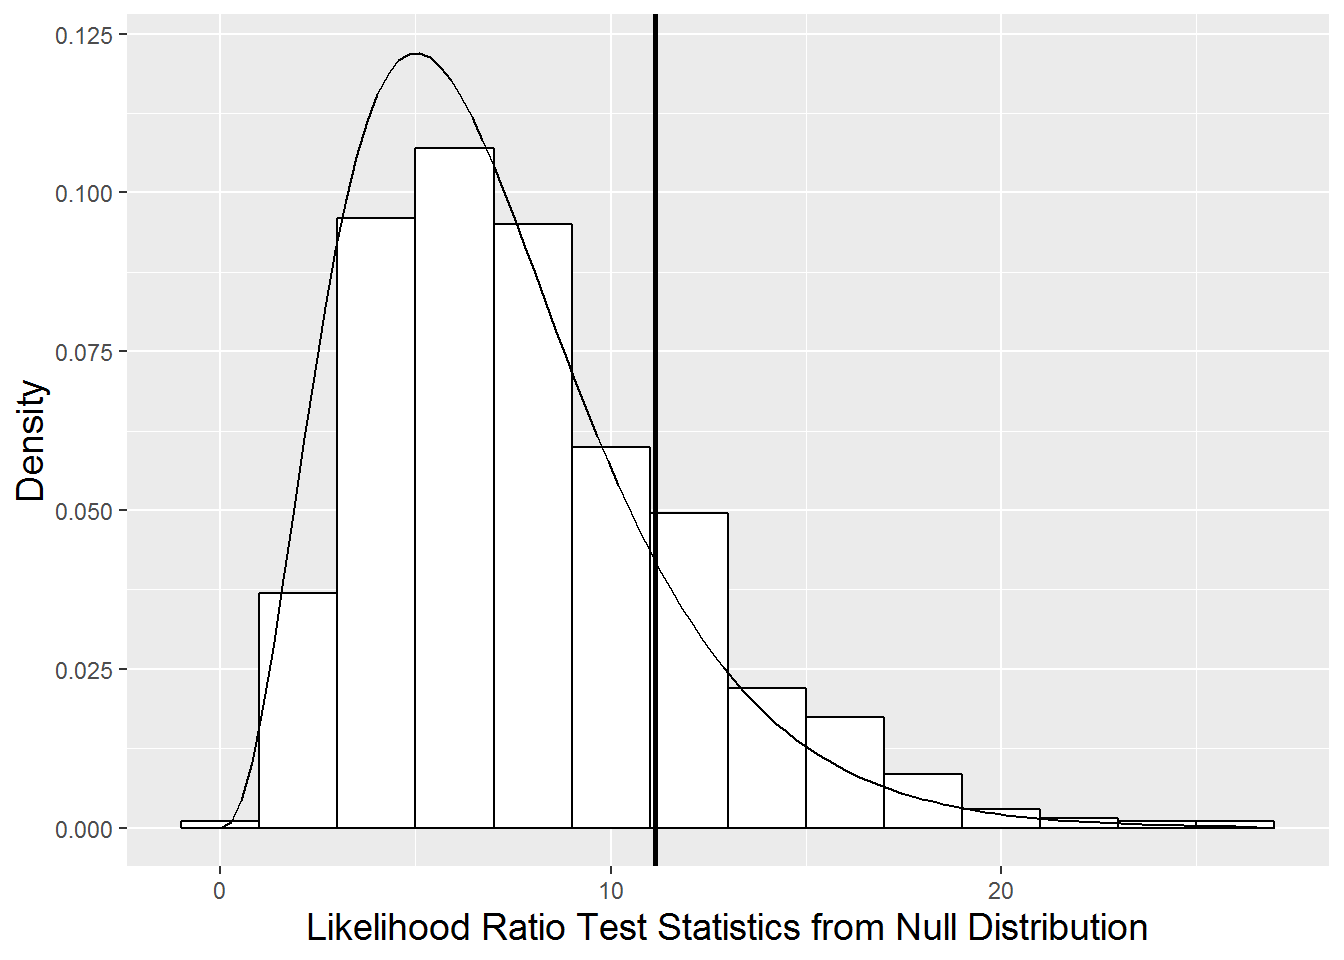 Null distribution of likelihood ratio test statistic derived using parametric bootstrap (histogram) compared to a chi-square distribution with 7 degrees of freedom (smooth curve).  The horizontal line represents the observed likelihood ratio test statistic.